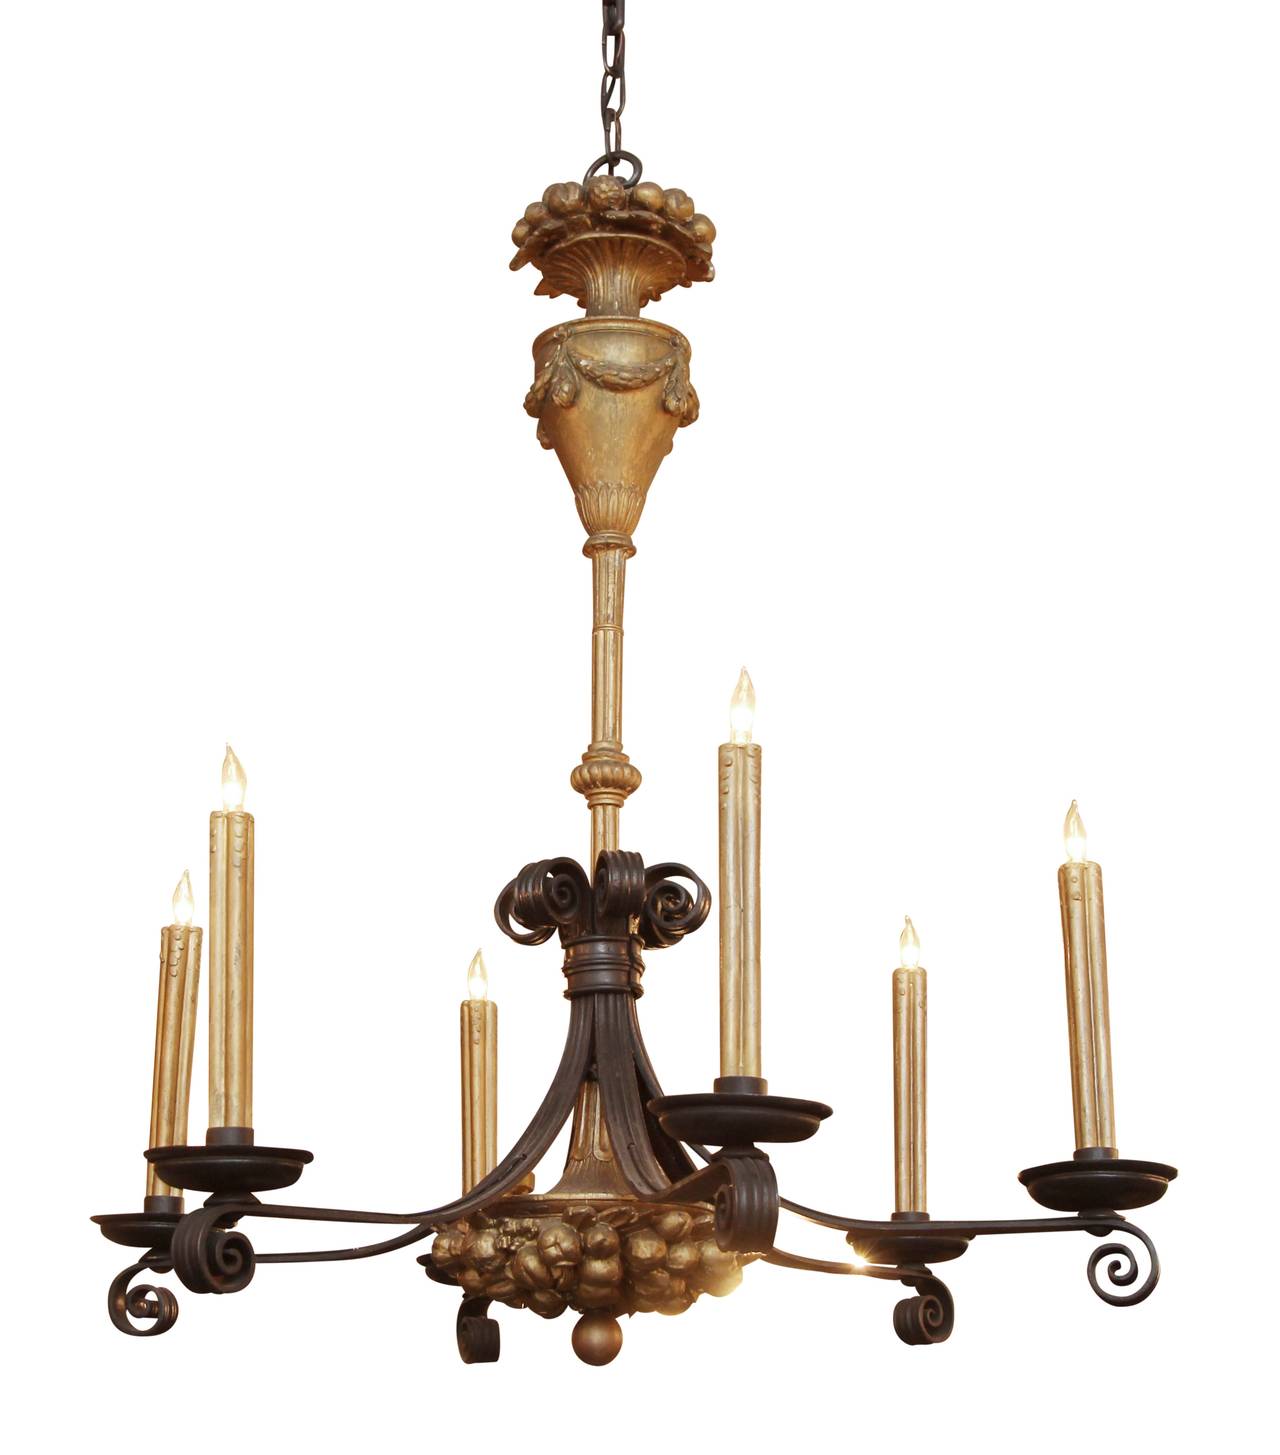 Neoclassical style black and gold French chandelier made of iron and gesso, circa 1930s. This item can be viewed at our 302 Bowery location in Manhattan.